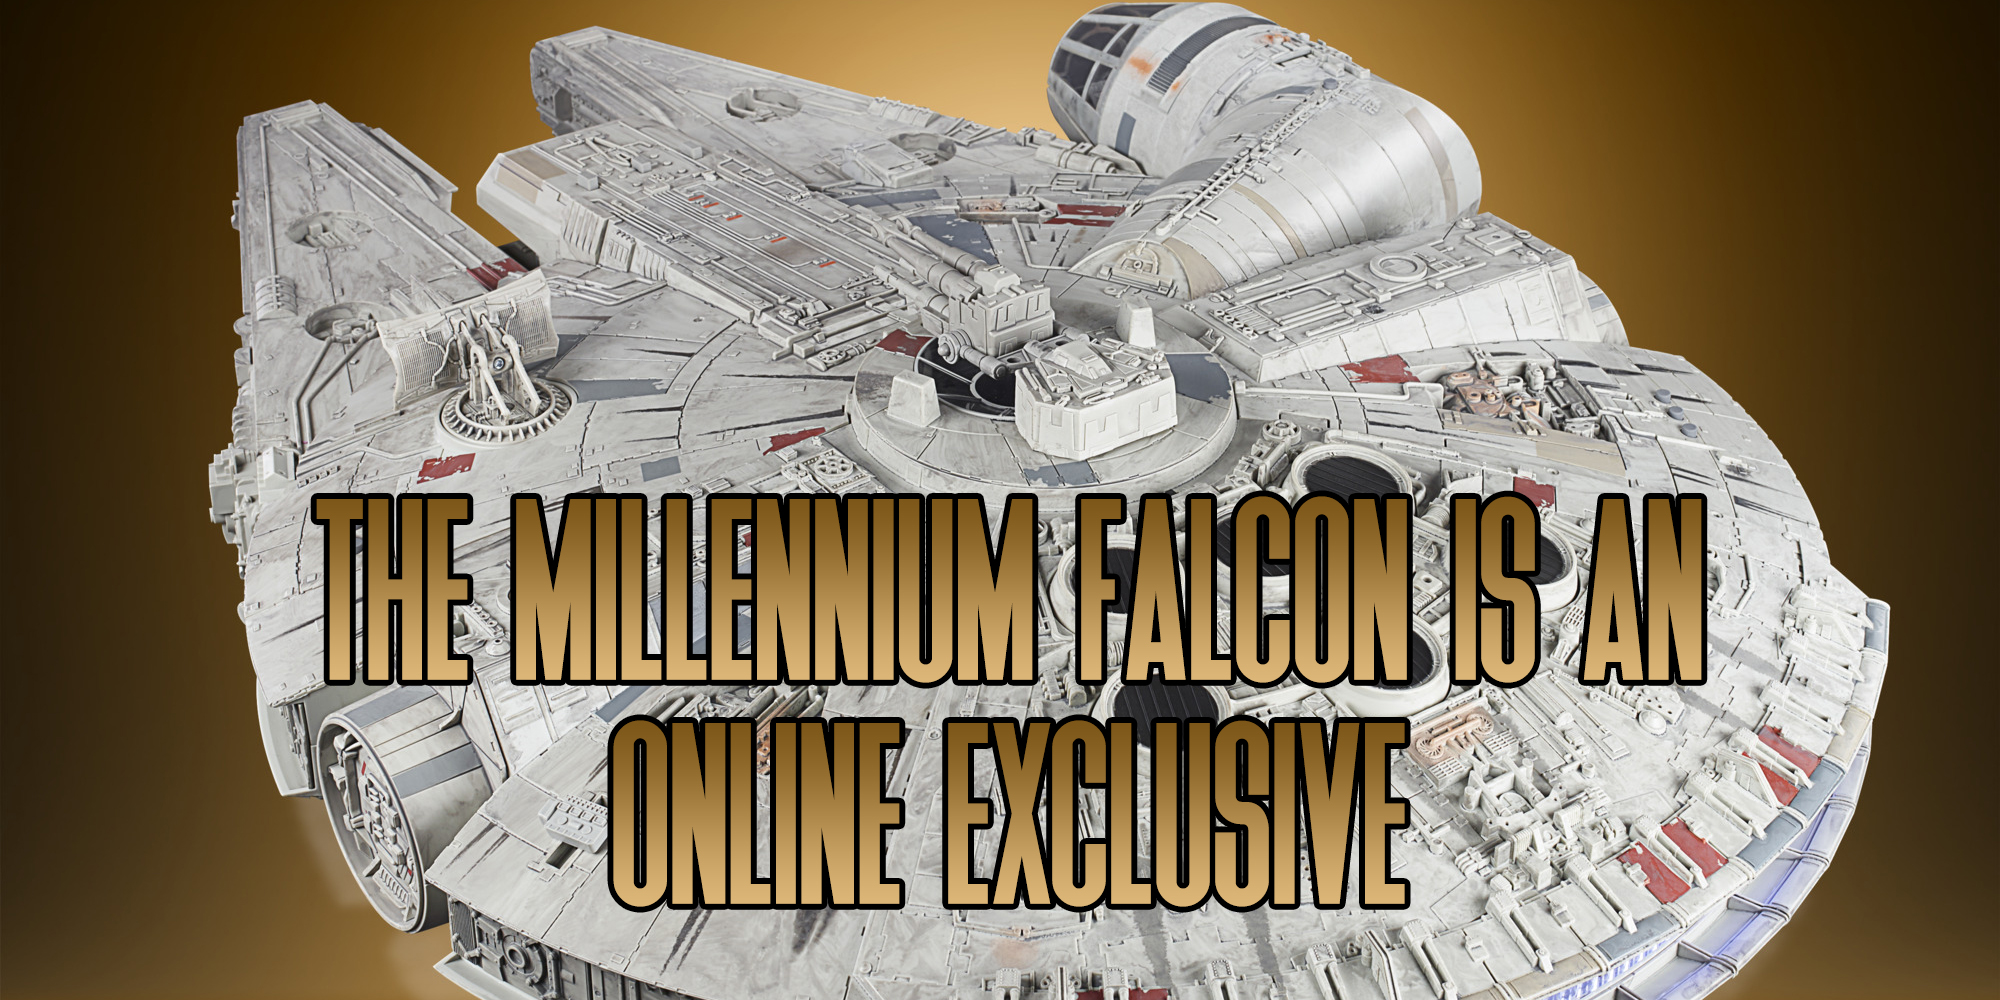 The Millennium Falcon Is An Online Exclusive